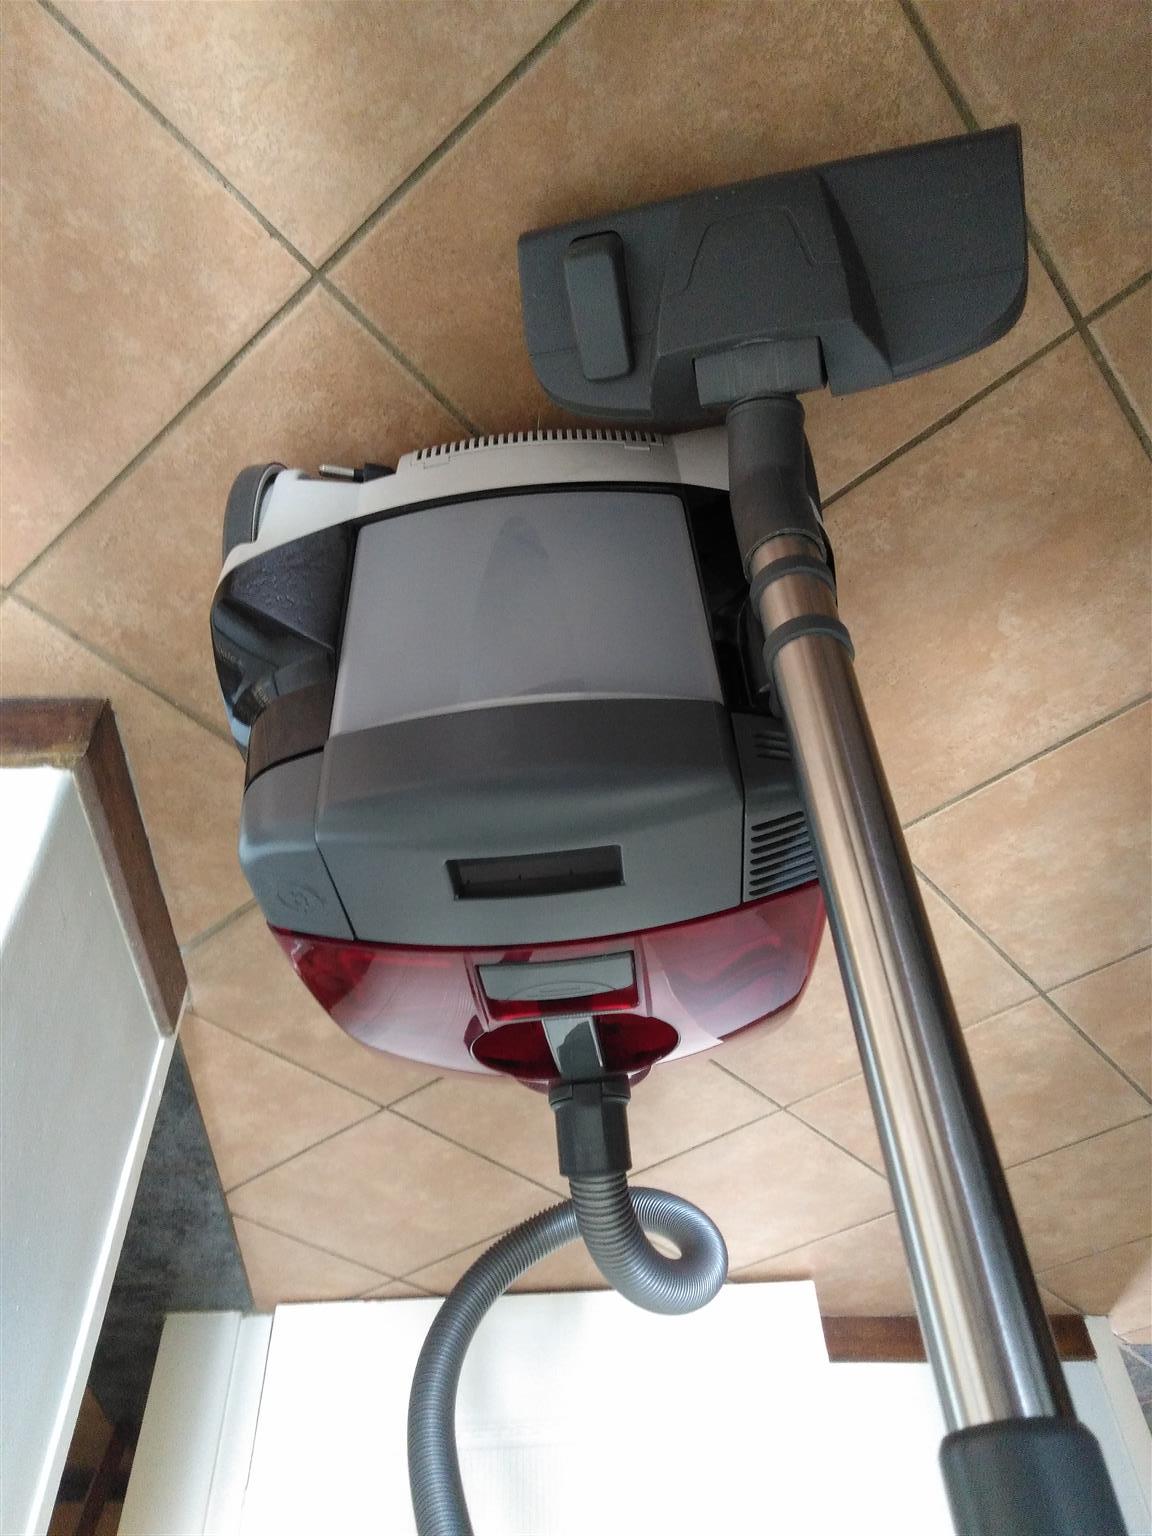 Genisis Baumeister  all in one Vacuum Cleaner 